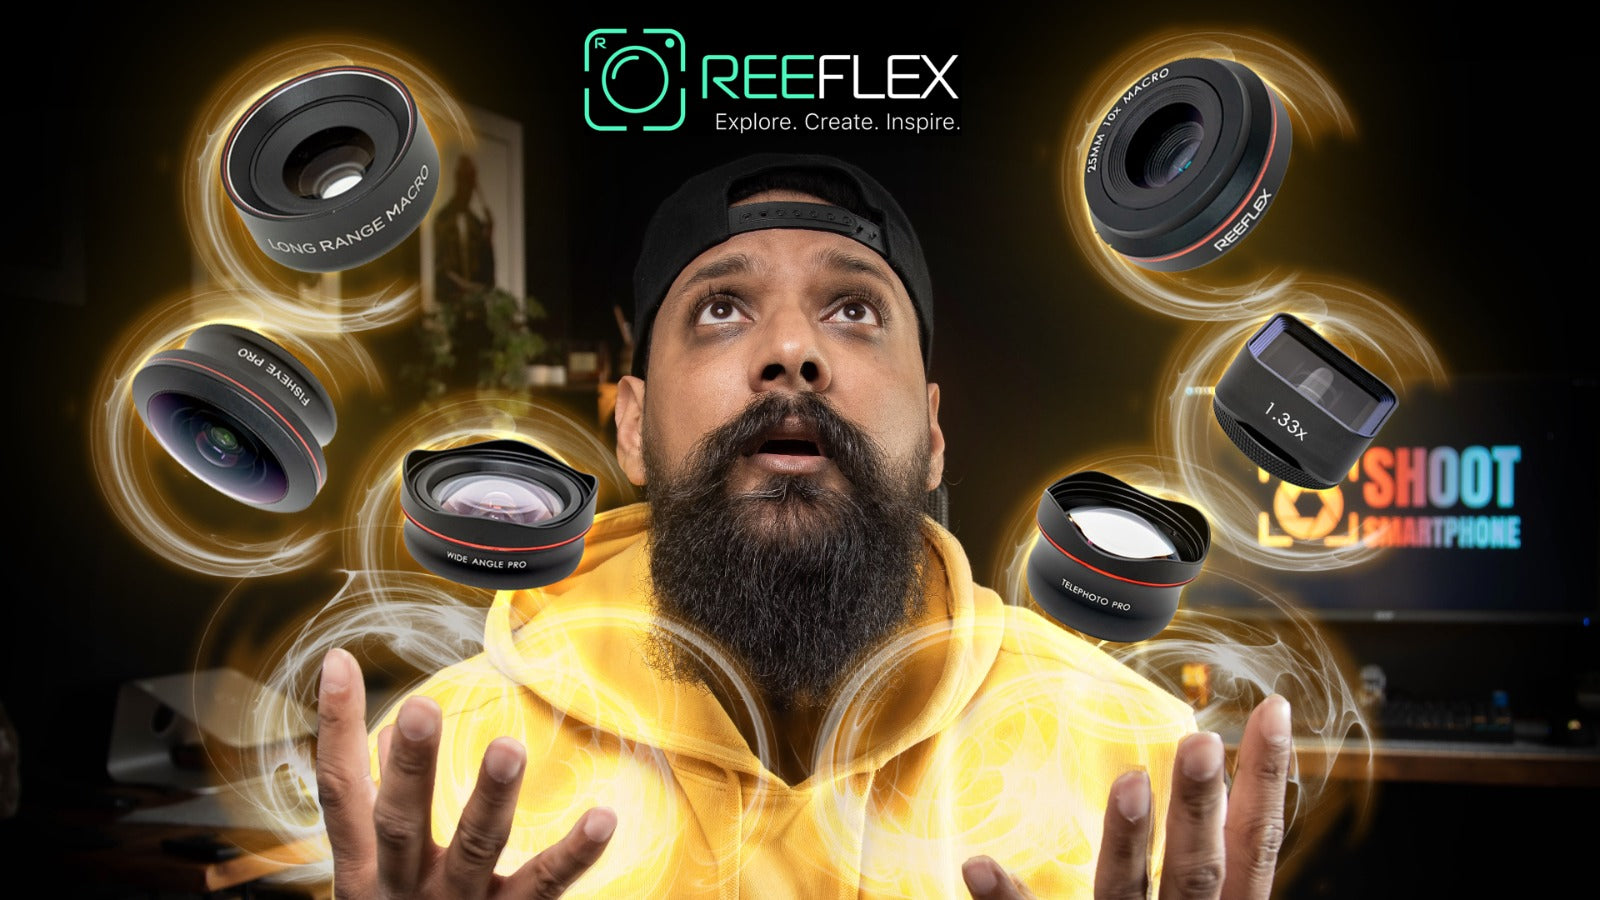 4 Reasons why you NEED iPhone Lenses! by Shoot Smartphone